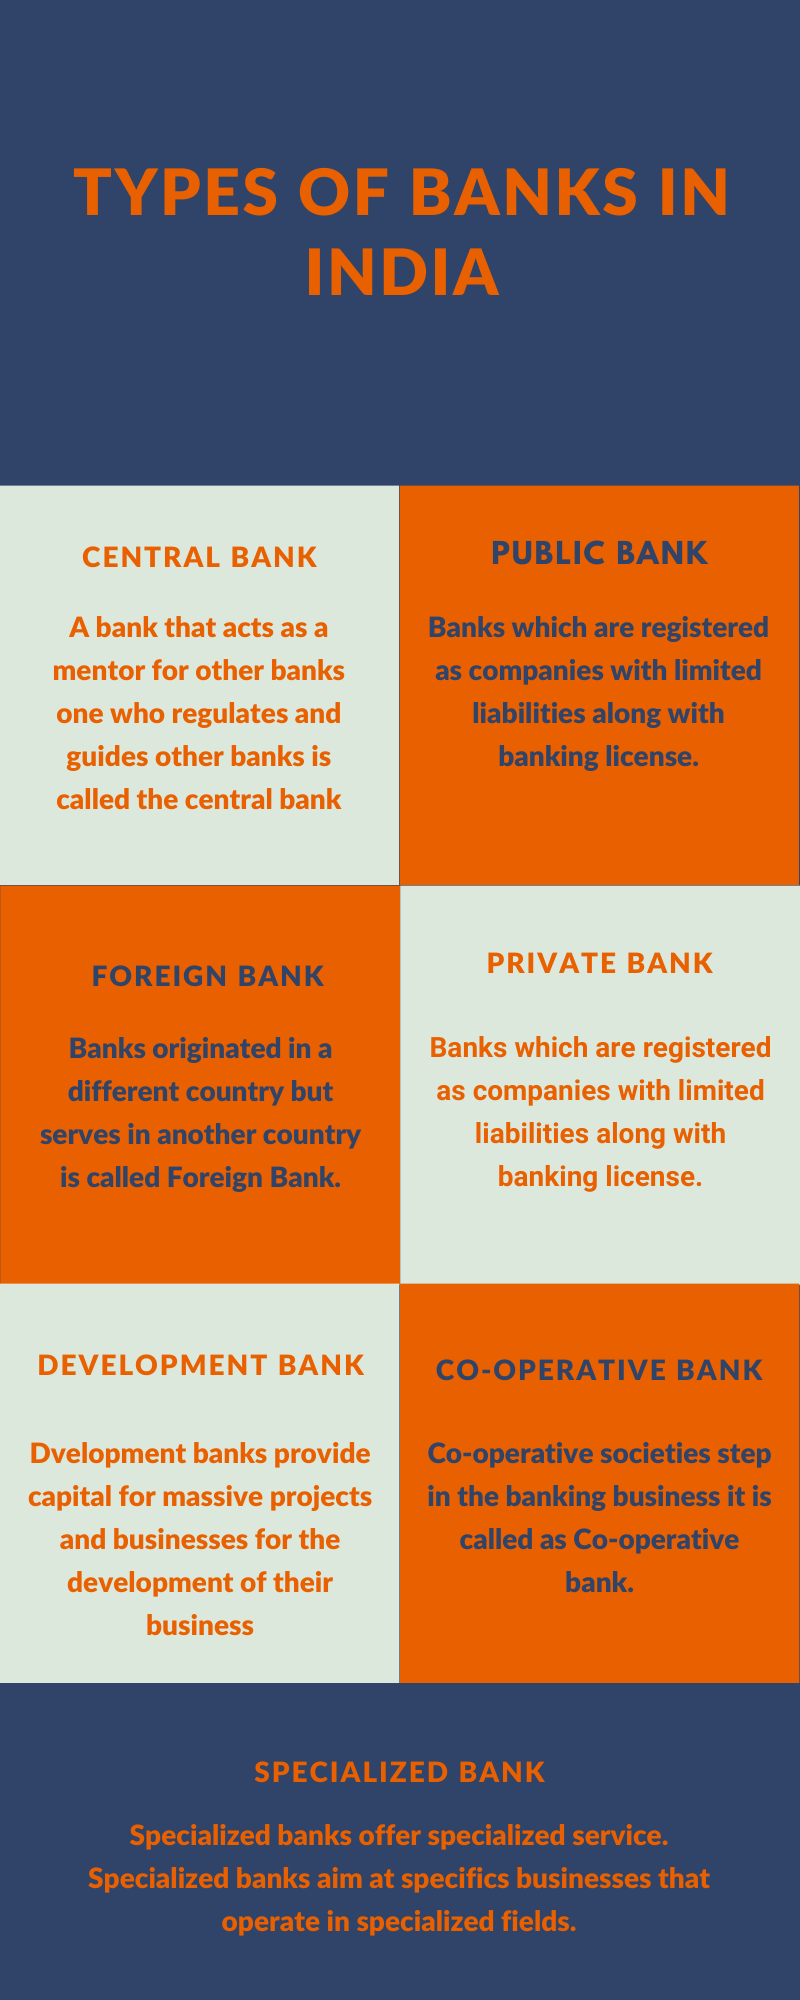 Type of banks in India infographic image